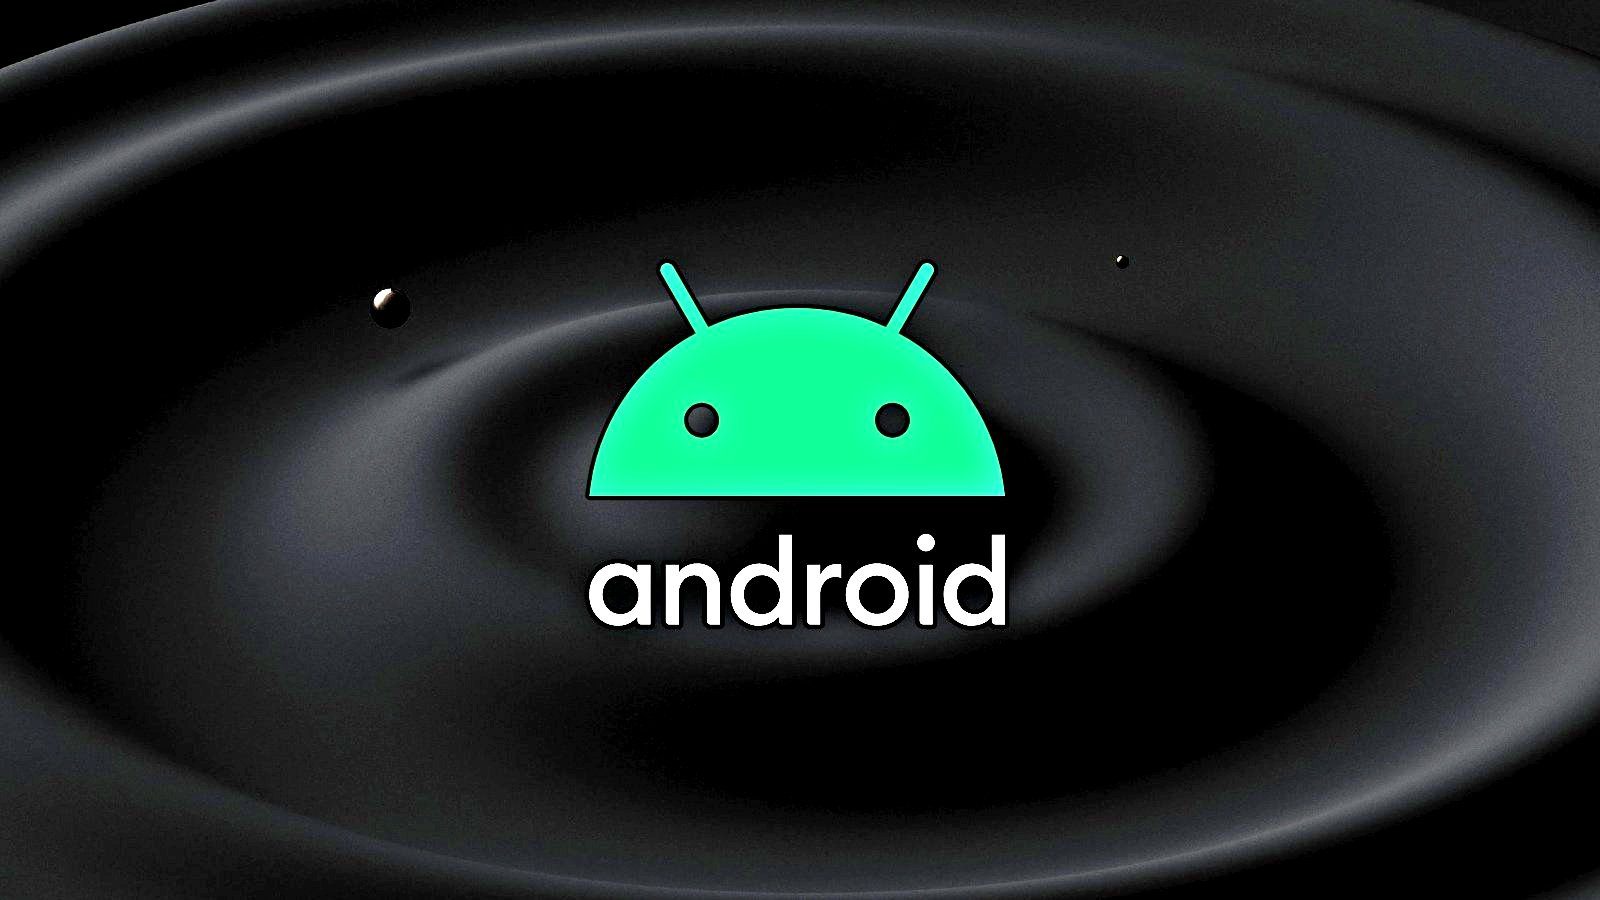 New Android updates fix kernel bug exploited in spyware attacks – Source: www.bleepingcomputer.com